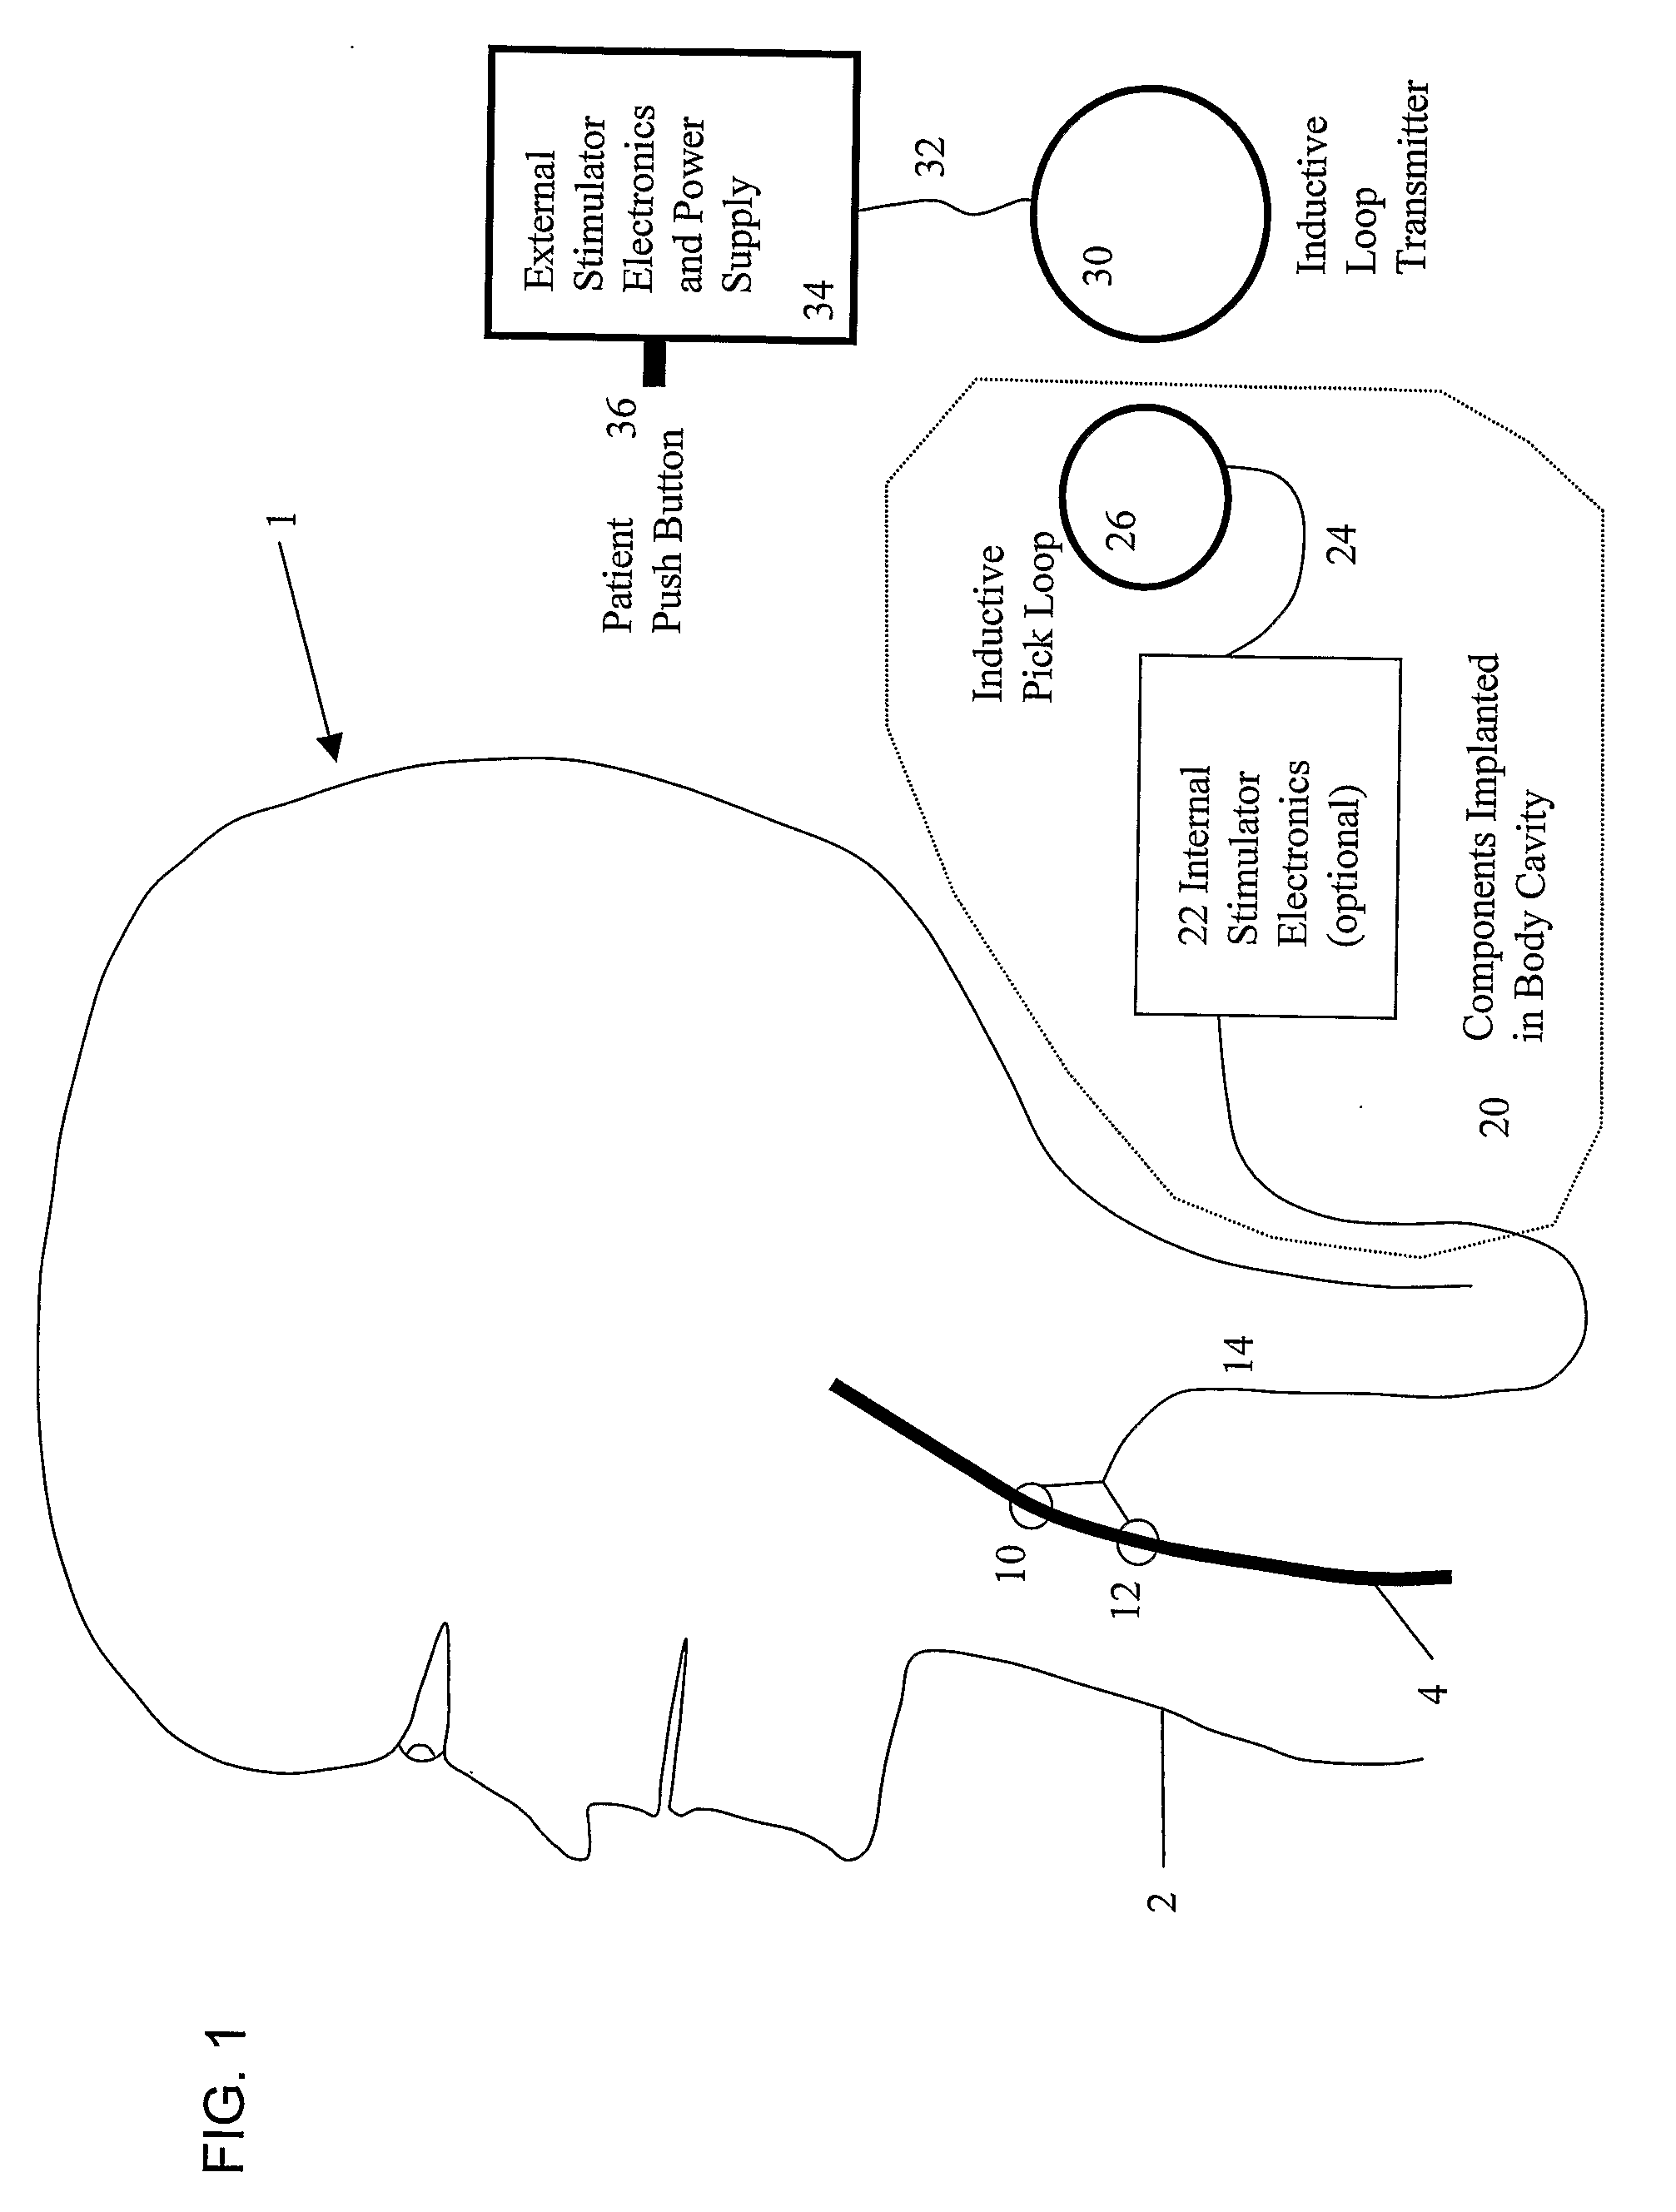 System and Method for Treating Nausea and Vomiting by Vagus Nerve Stimulation